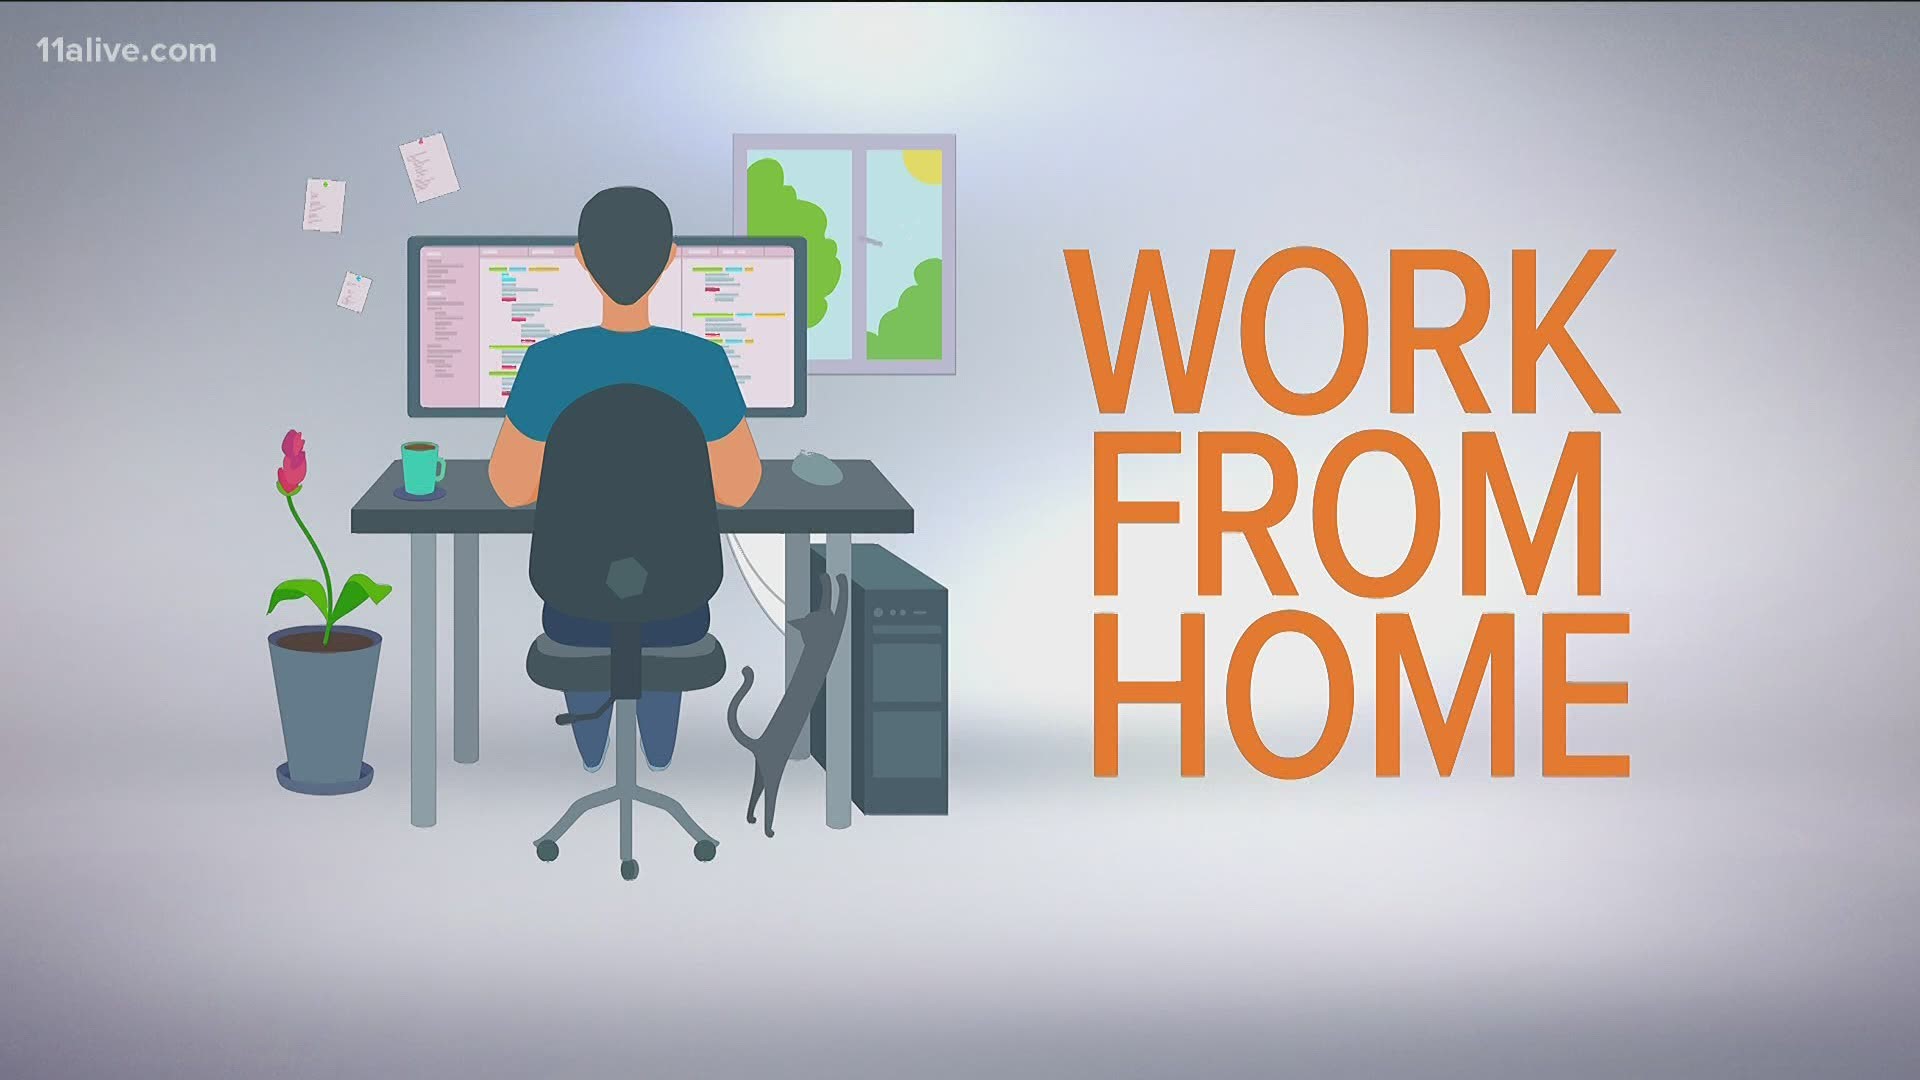 It's time to add your teleworking skills to your resume.